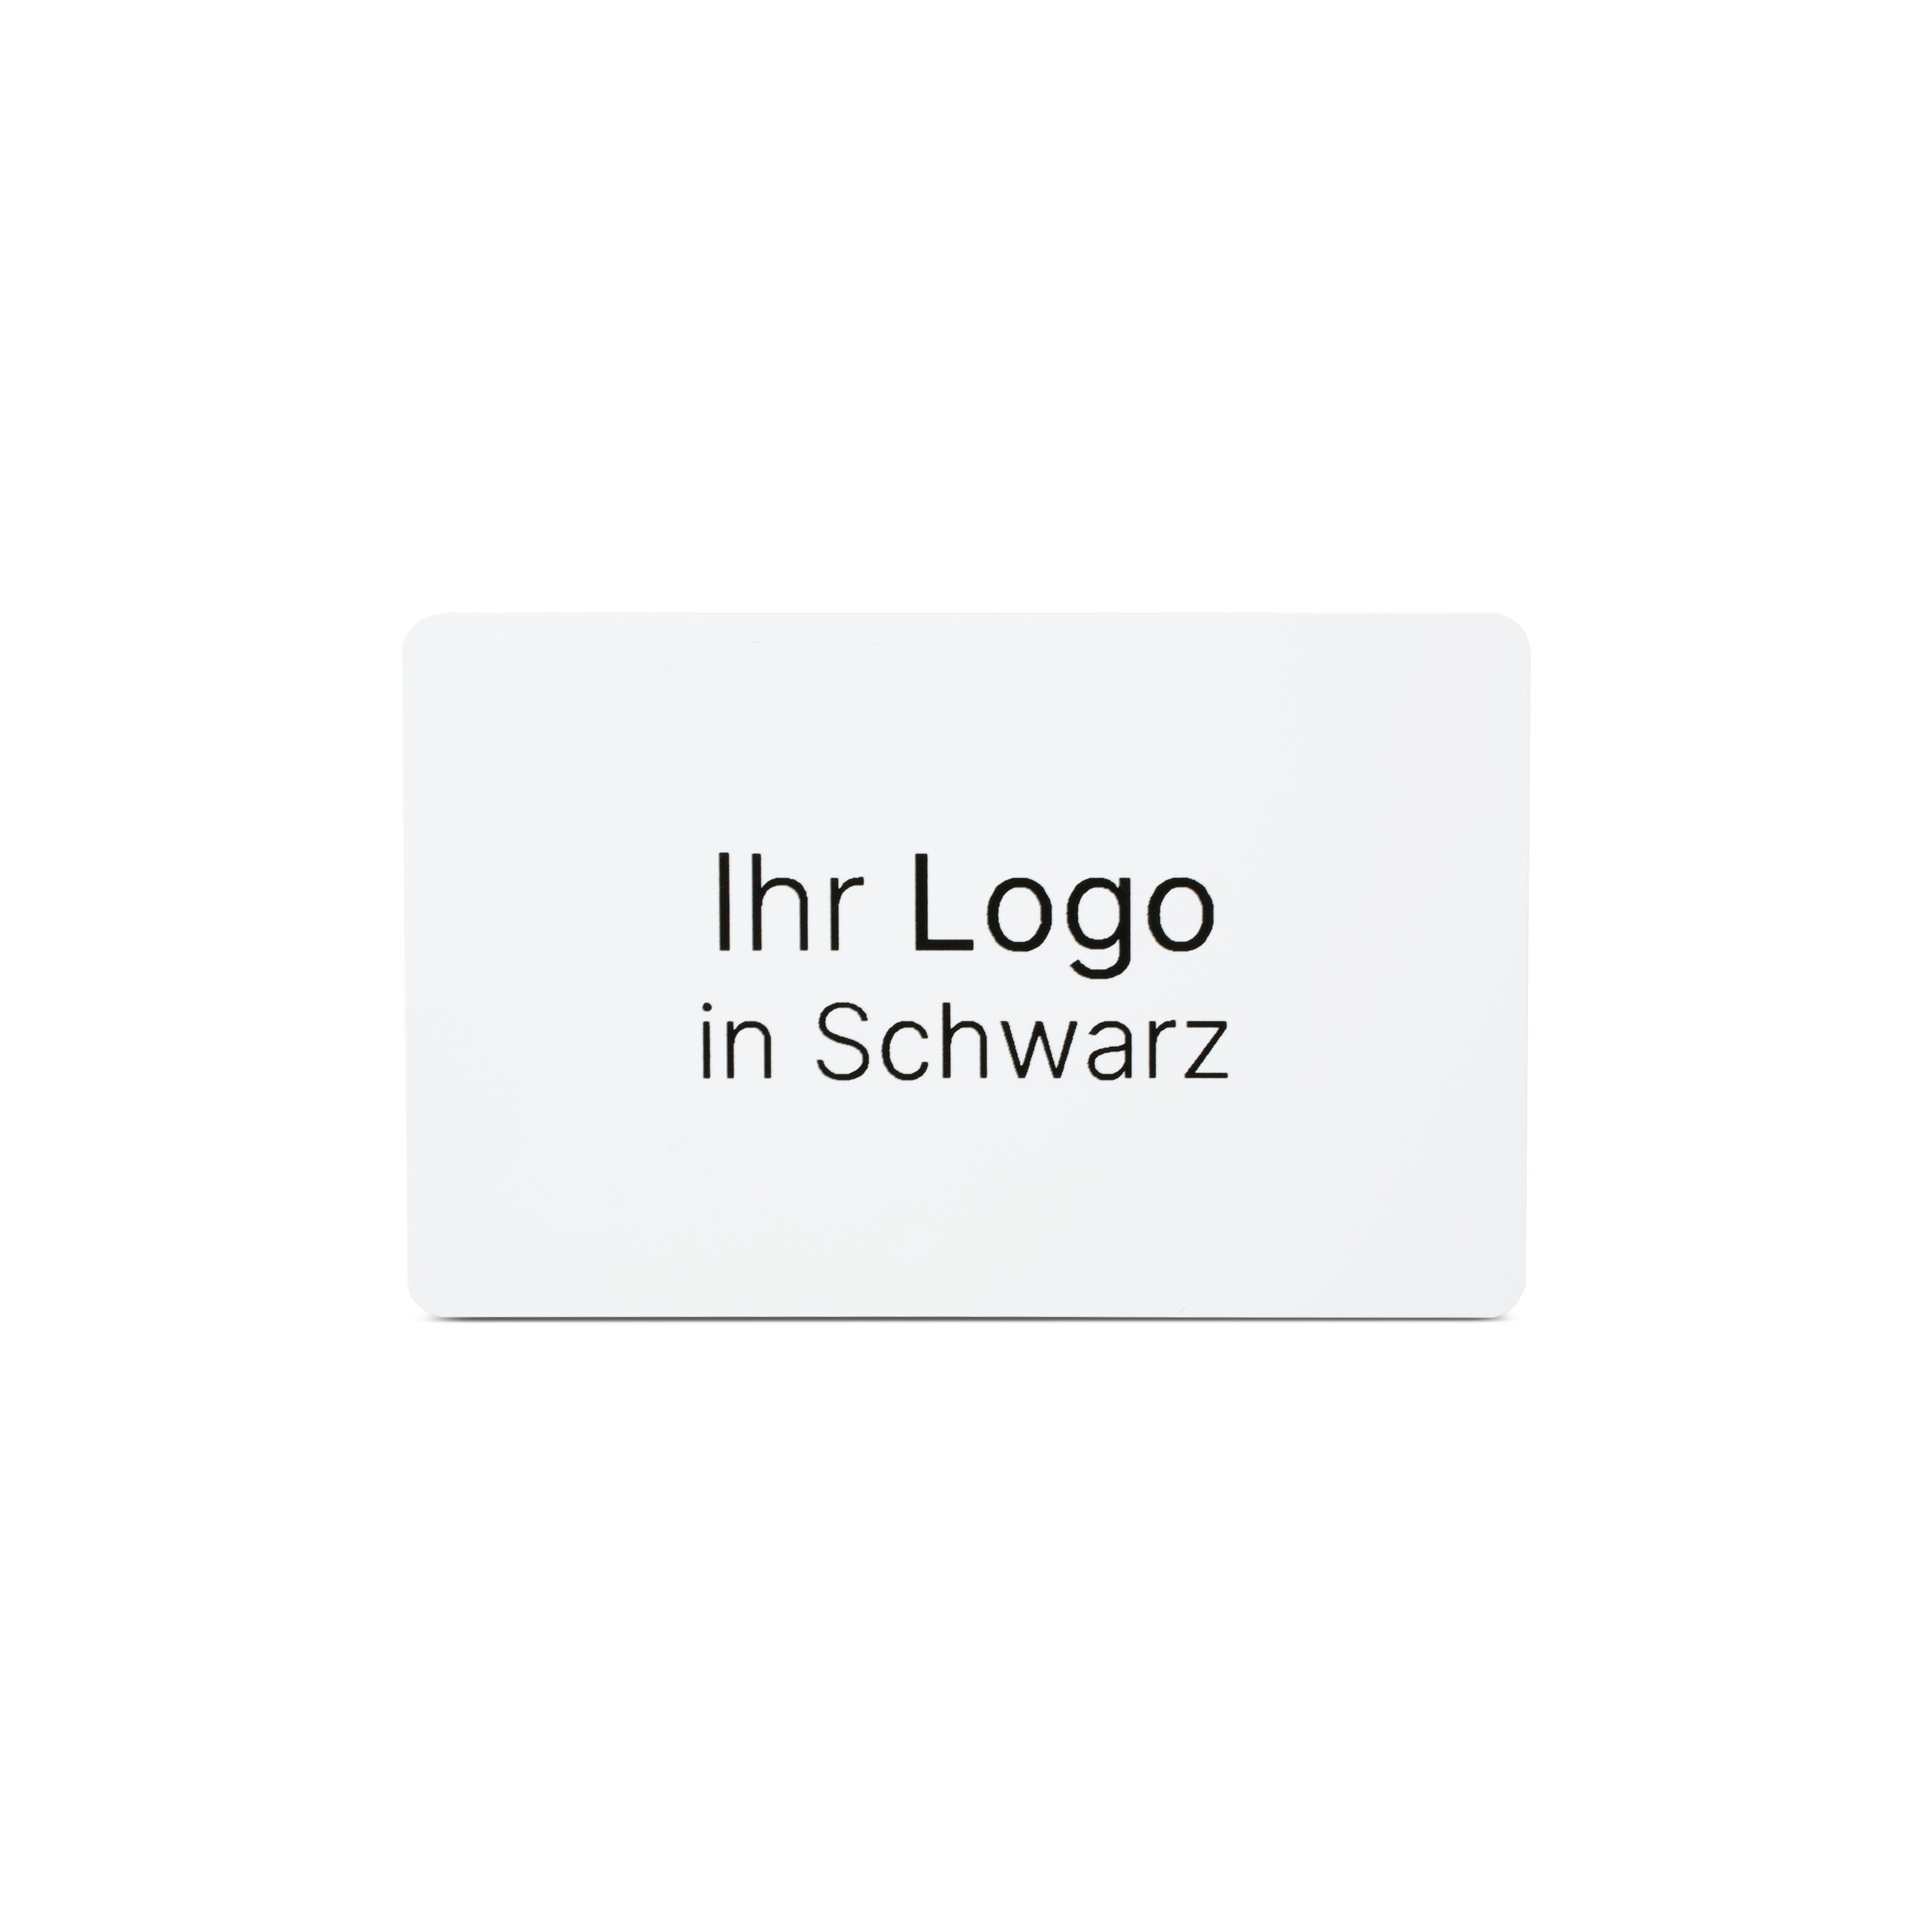 Online NFC business card PVC - incl. URL + print - white glossy